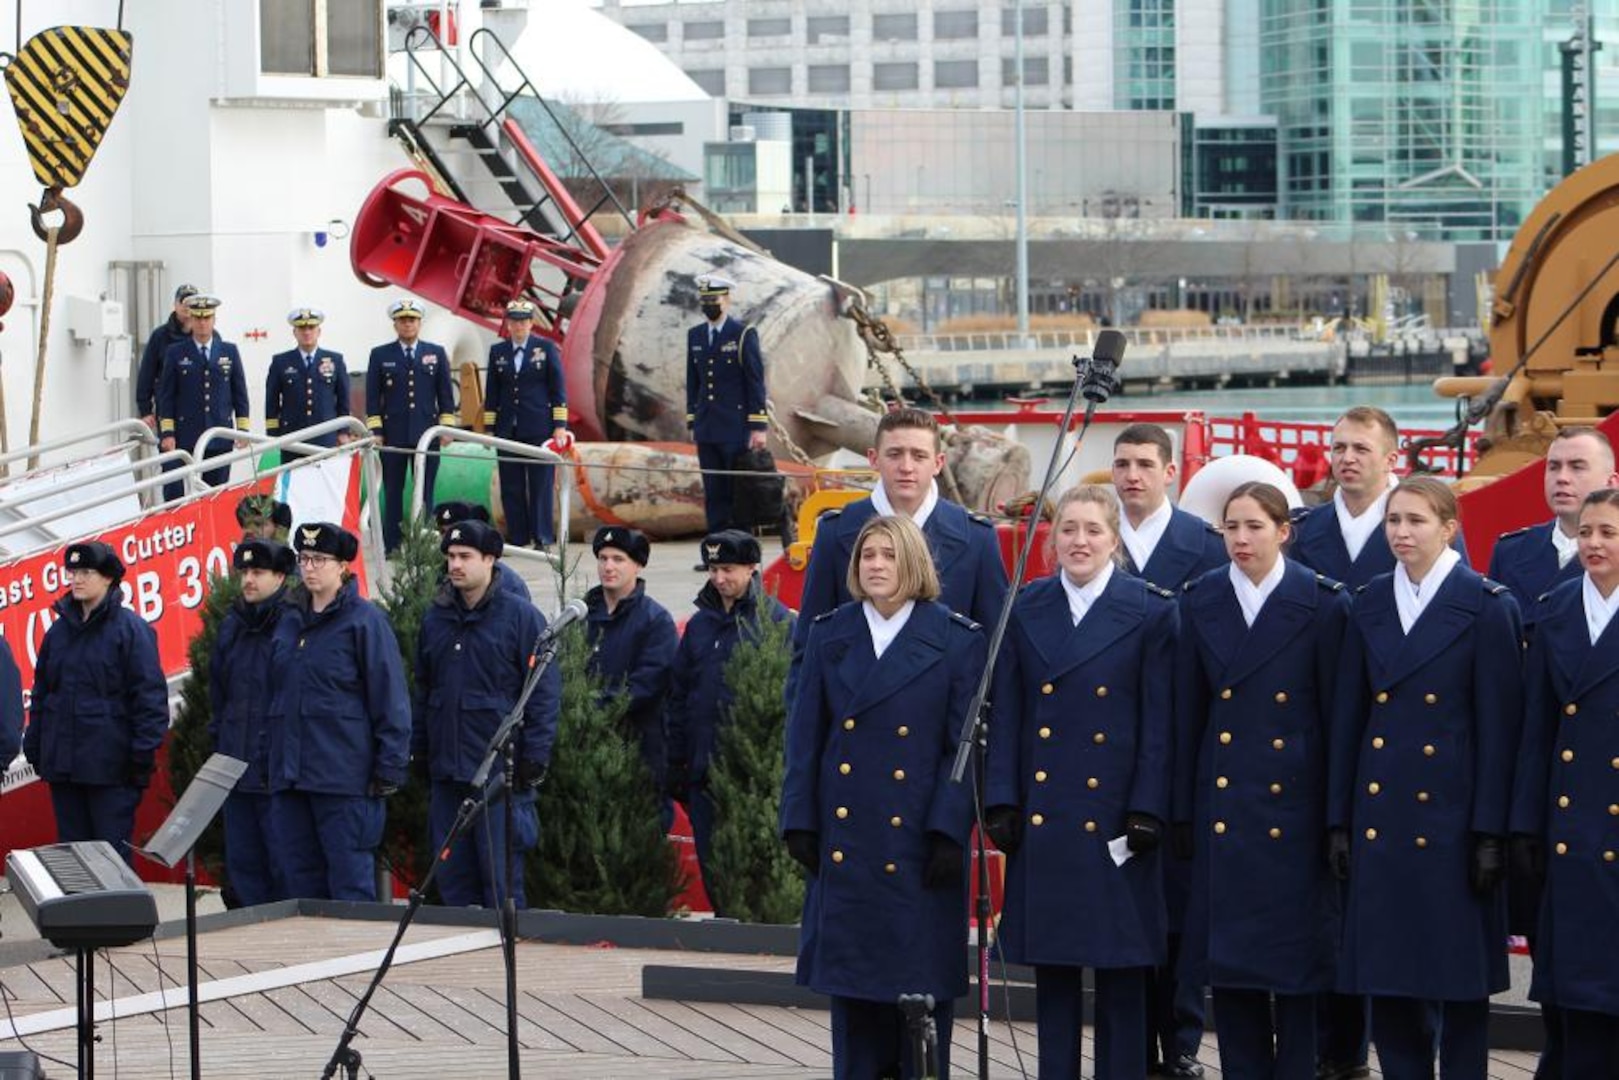 Chicago's Christmas Ship delivers 1,200 trees to atrisk youth and